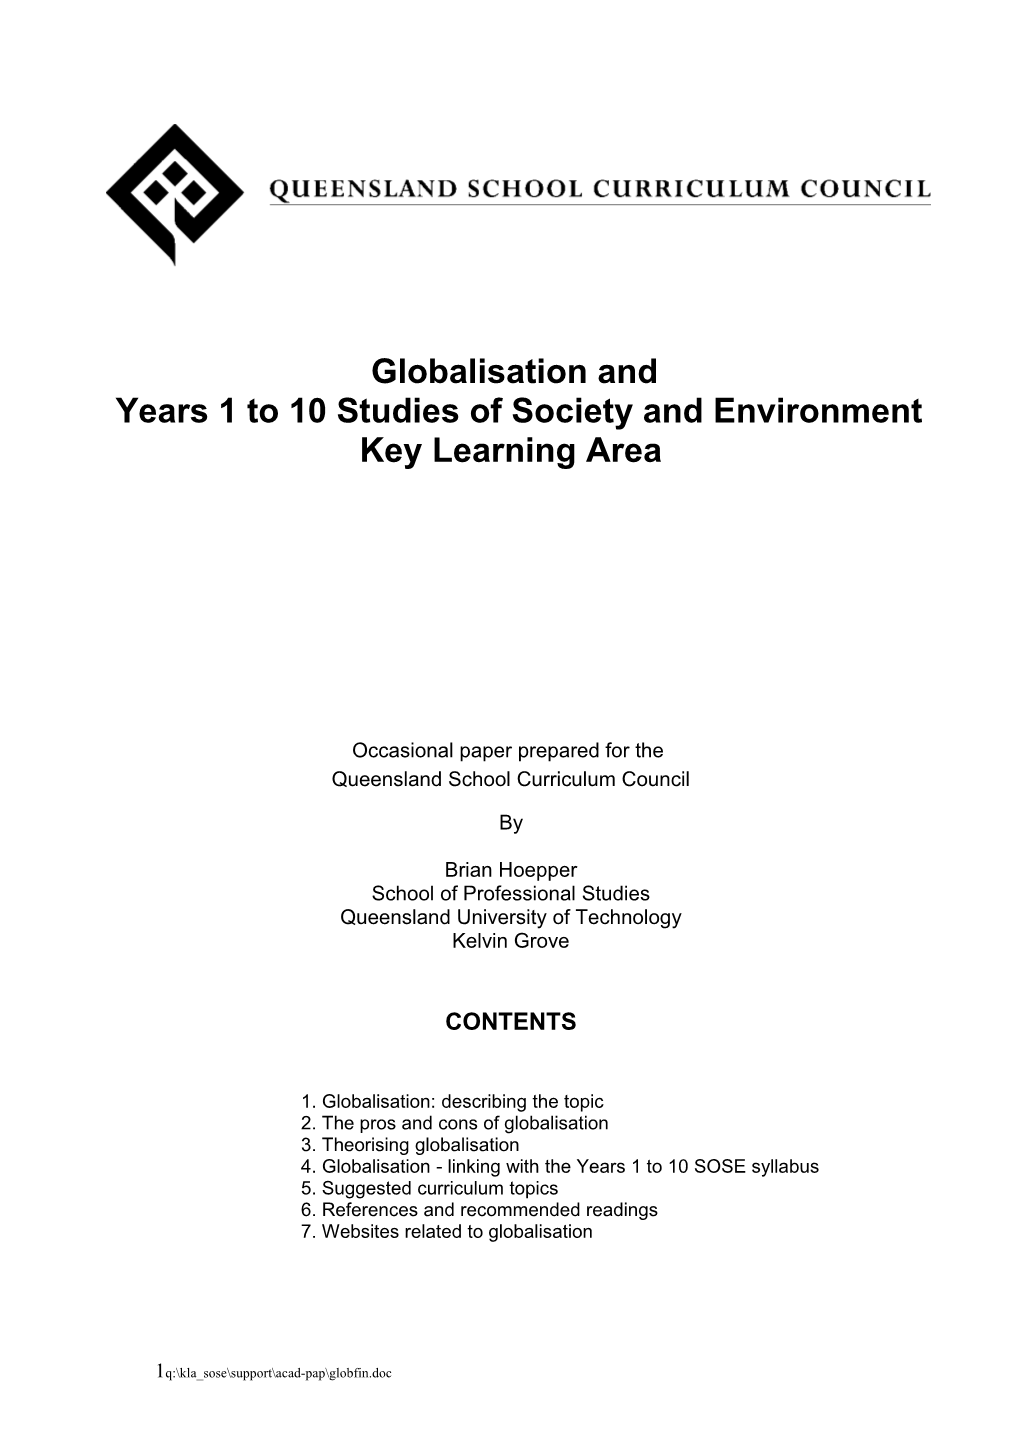 Globalisation and Years 1 to 10 Studies of Society and Environment Key Learning Area